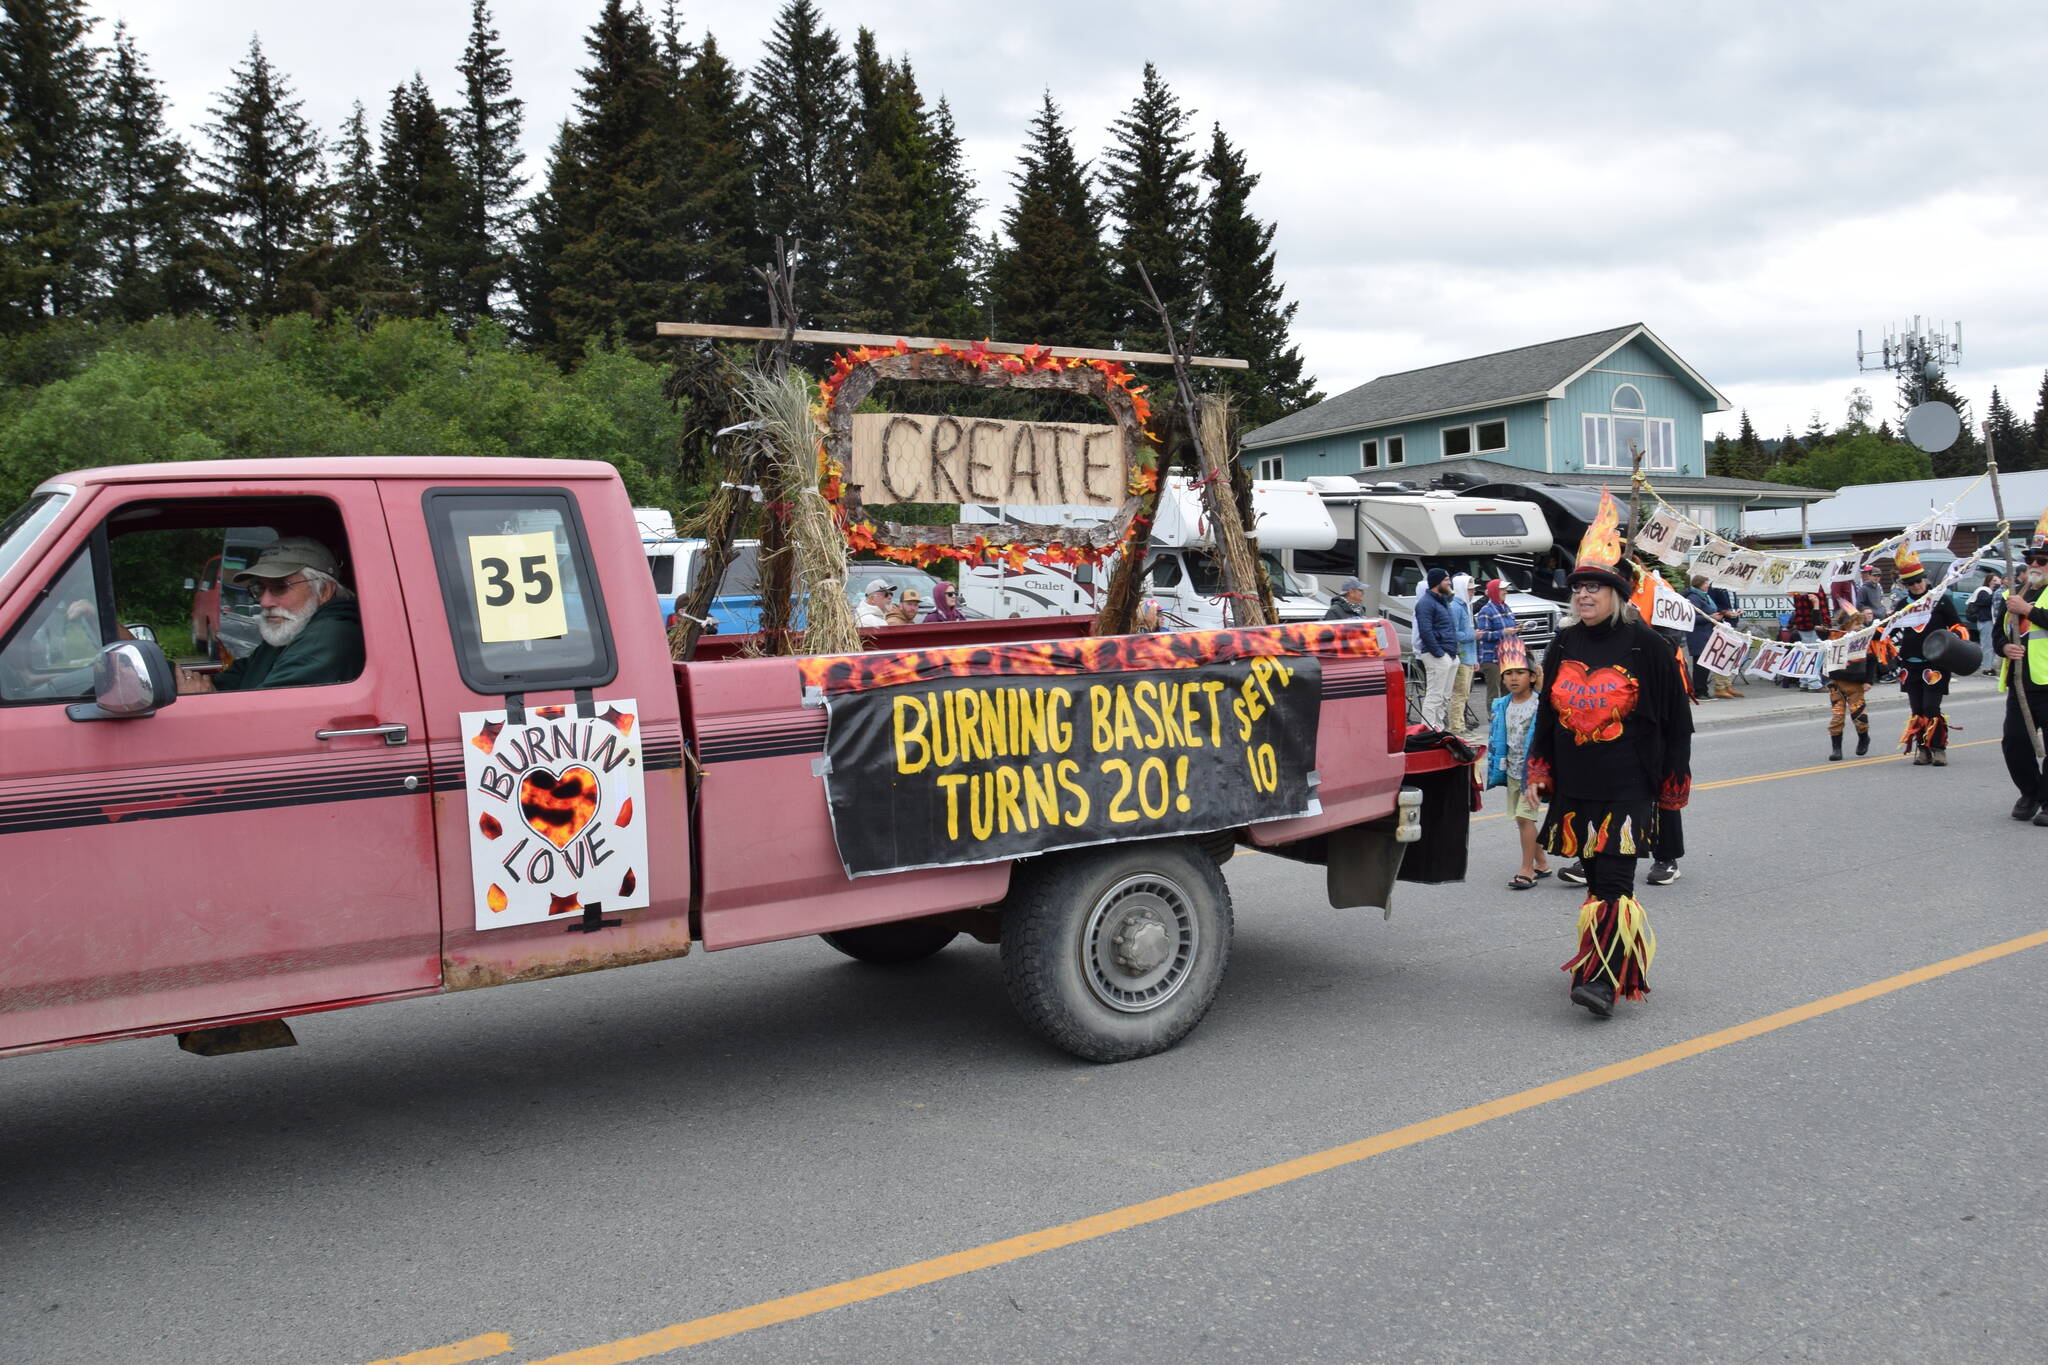 Photos by Emilie Springer/Homer News
Burning Basket turns 20 in 2023 at the “Seas the Day” parade on Tuesday, July 4<ins>, 2023</ins> in Homer<ins>, Alaska</ins>.